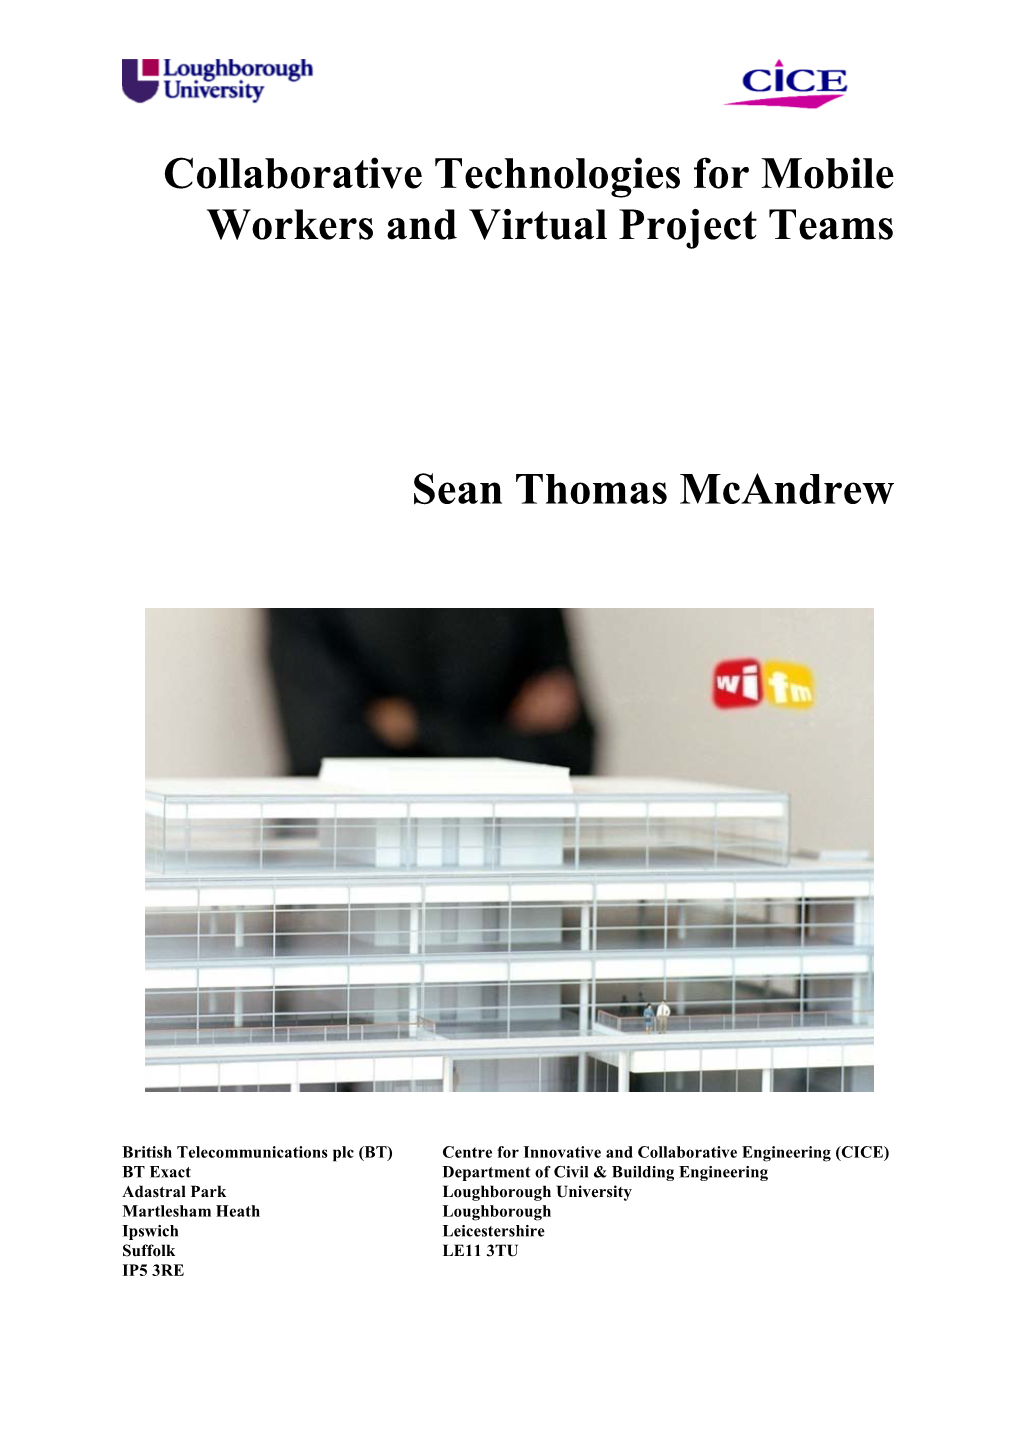 Collaborative Technologies for Mobile Workers and Virtual Project Teams